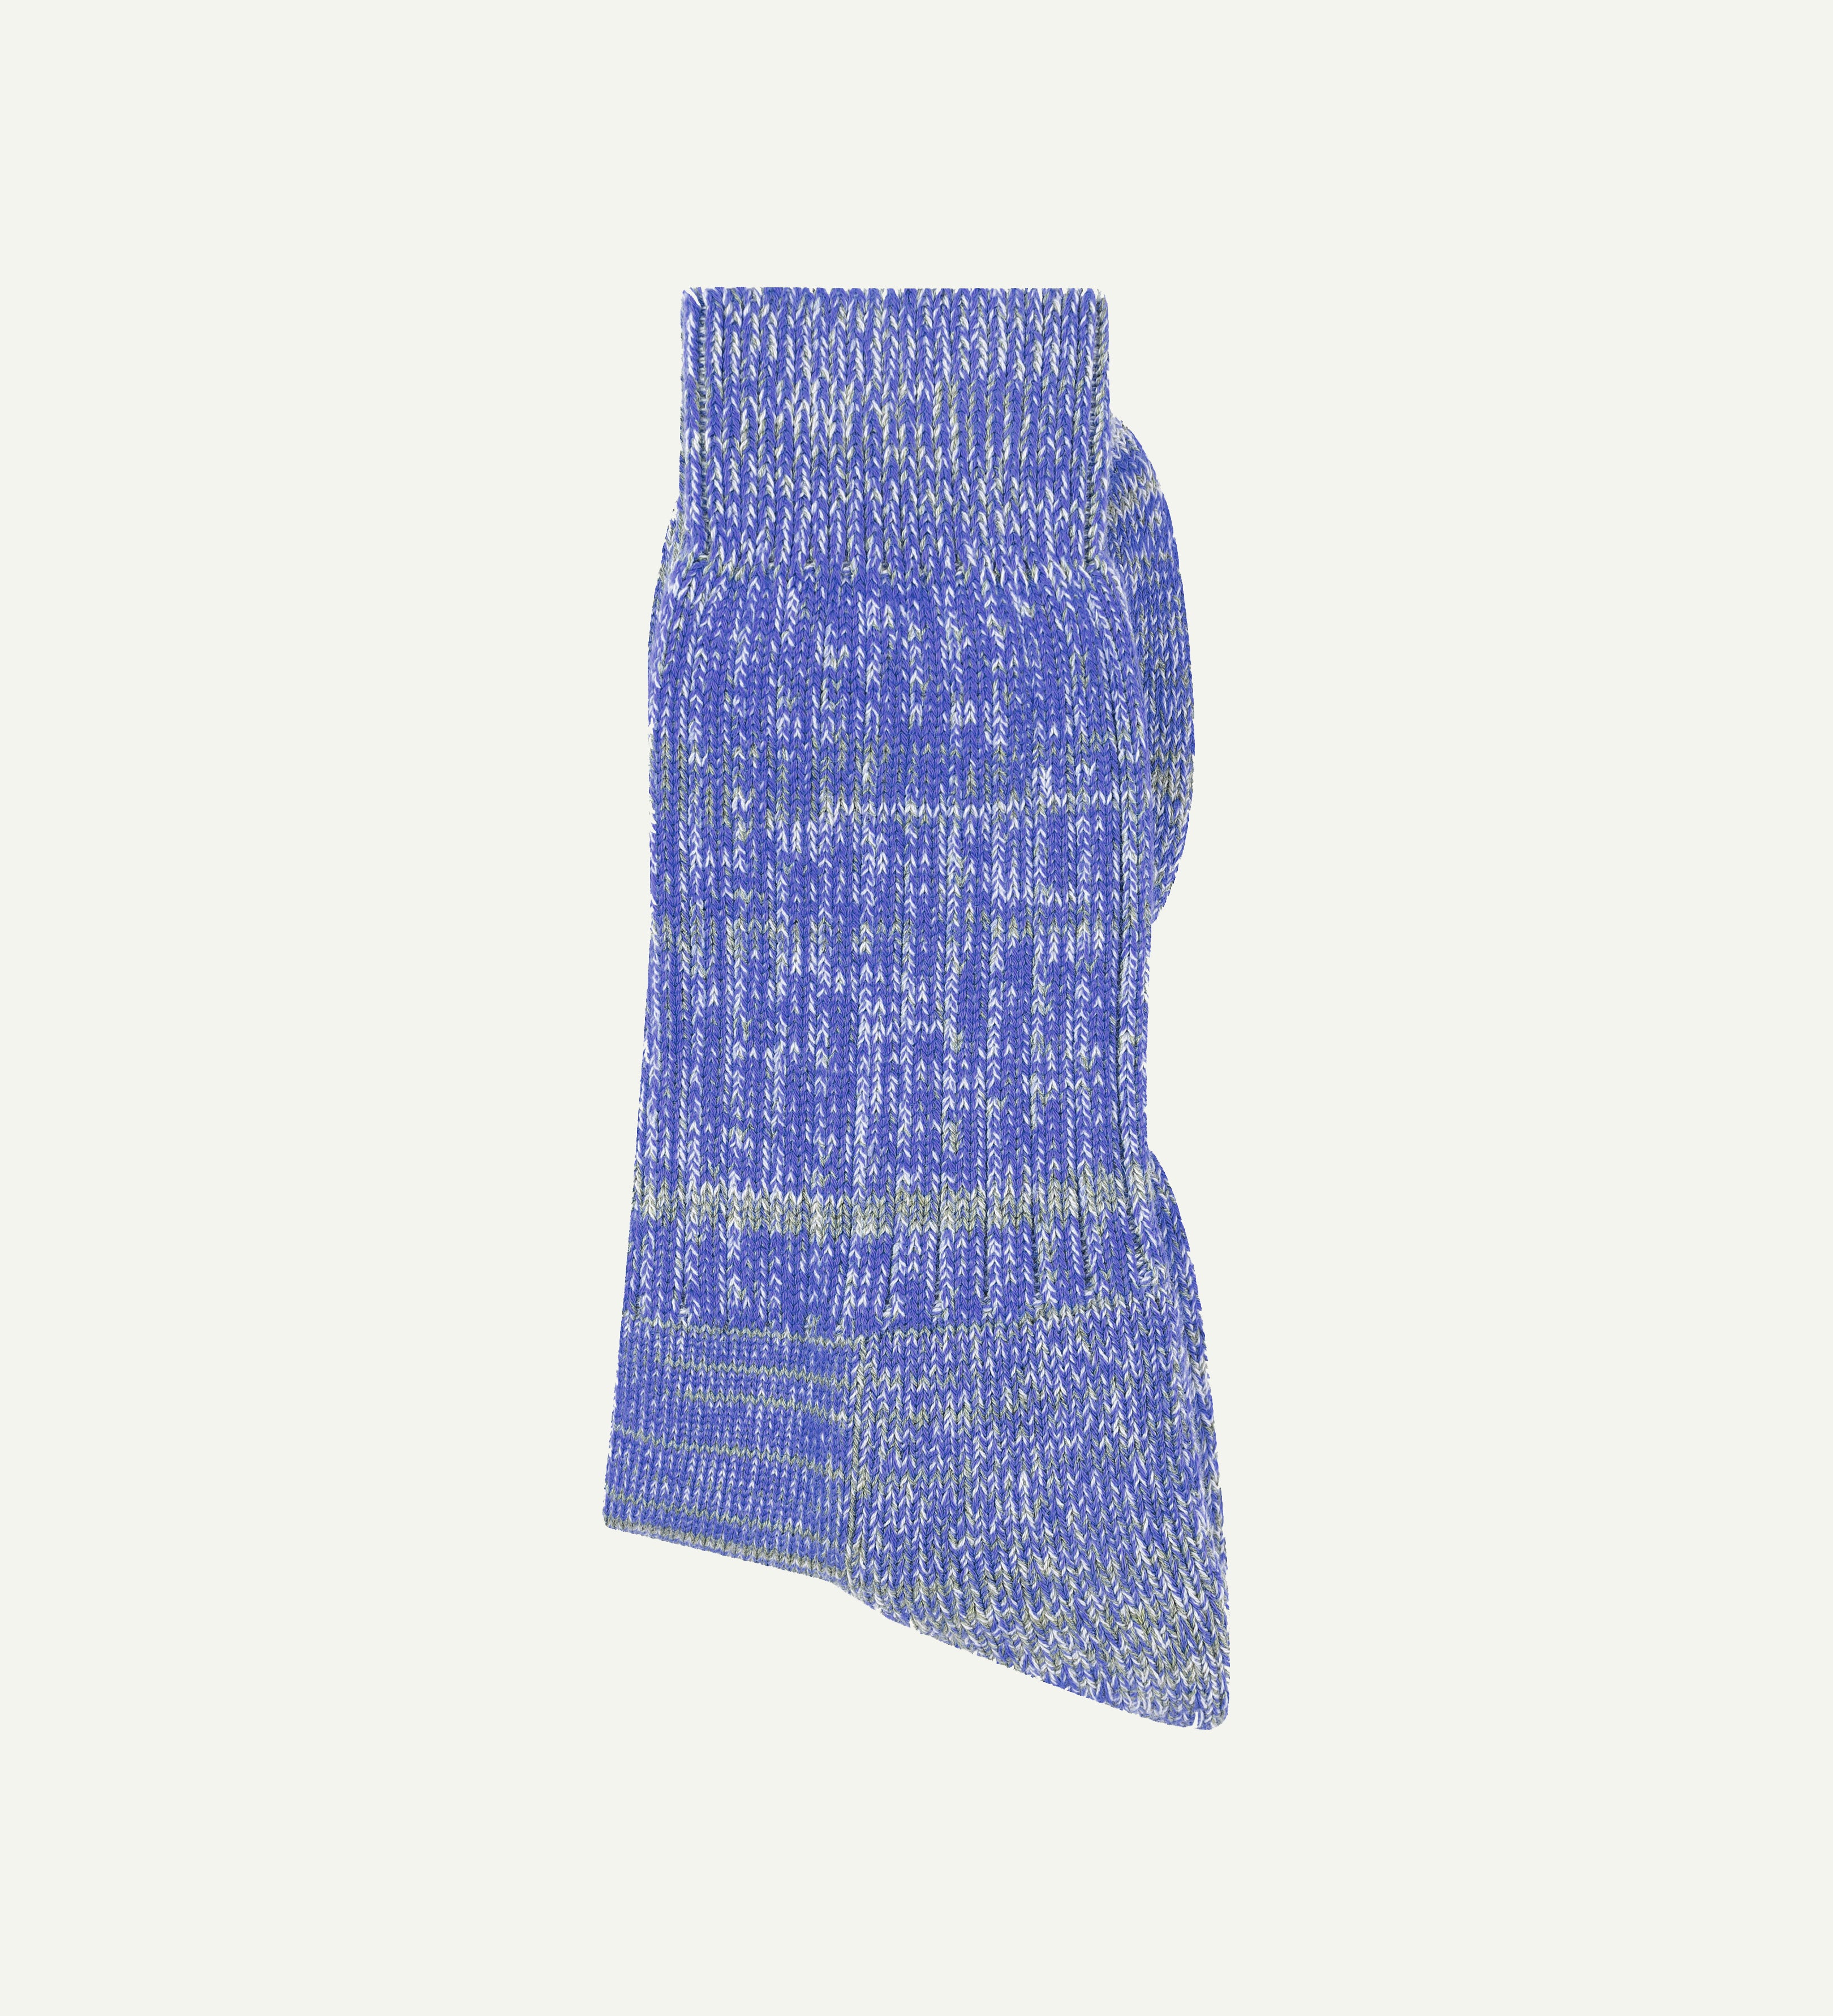 Folded shot of Uskees #4006 organic cotton socks in ultra blue